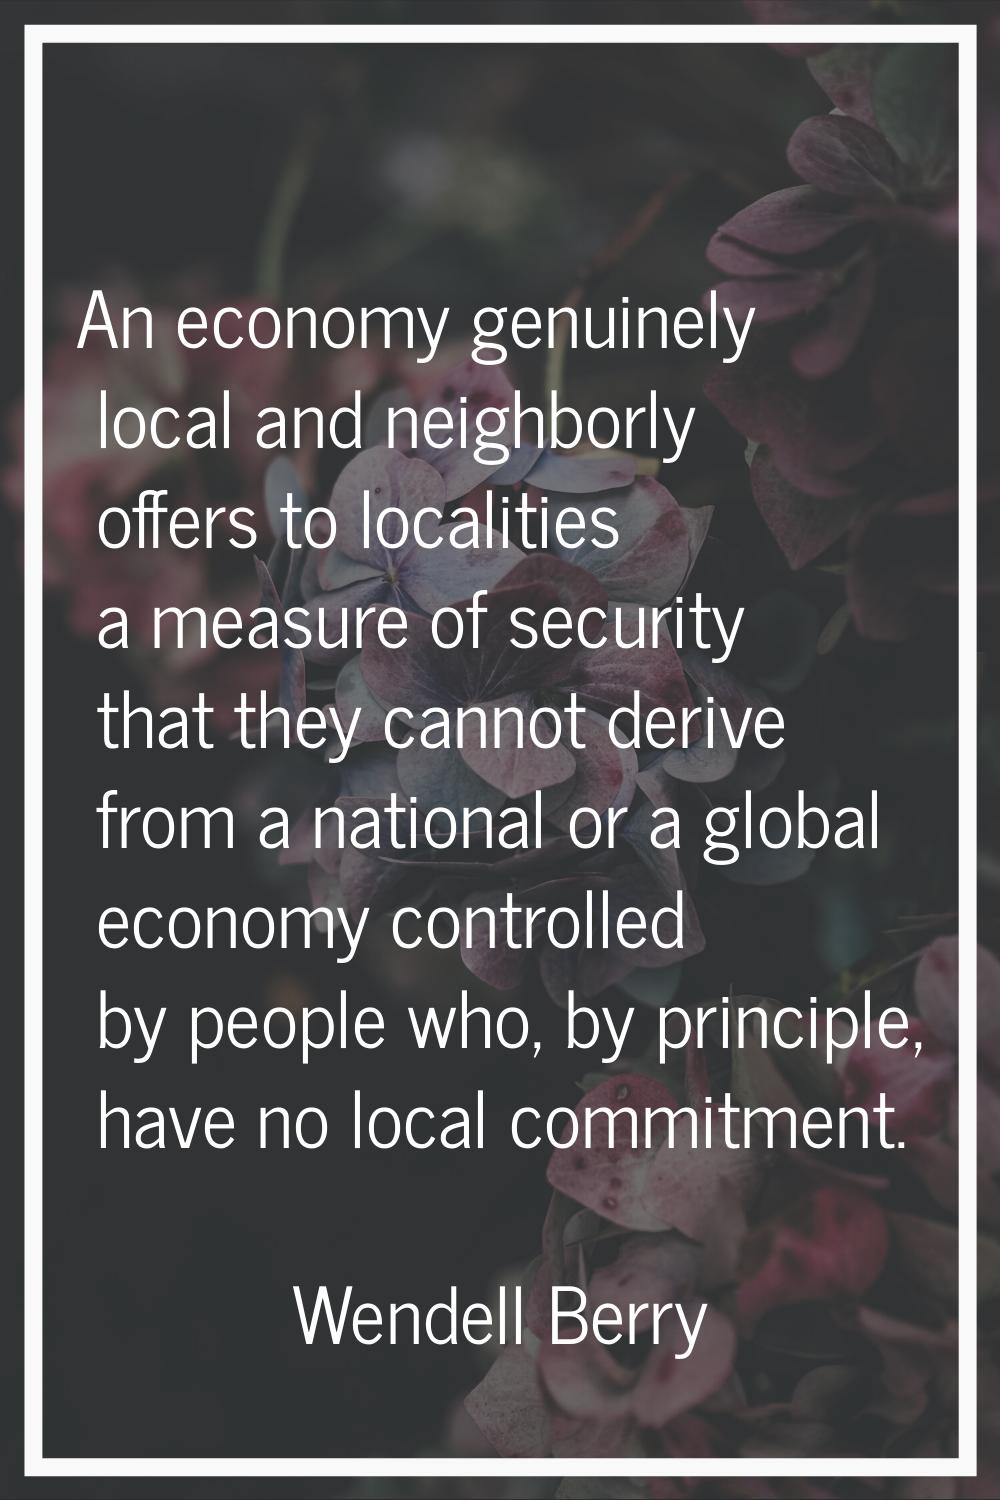 An economy genuinely local and neighborly offers to localities a measure of security that they cann